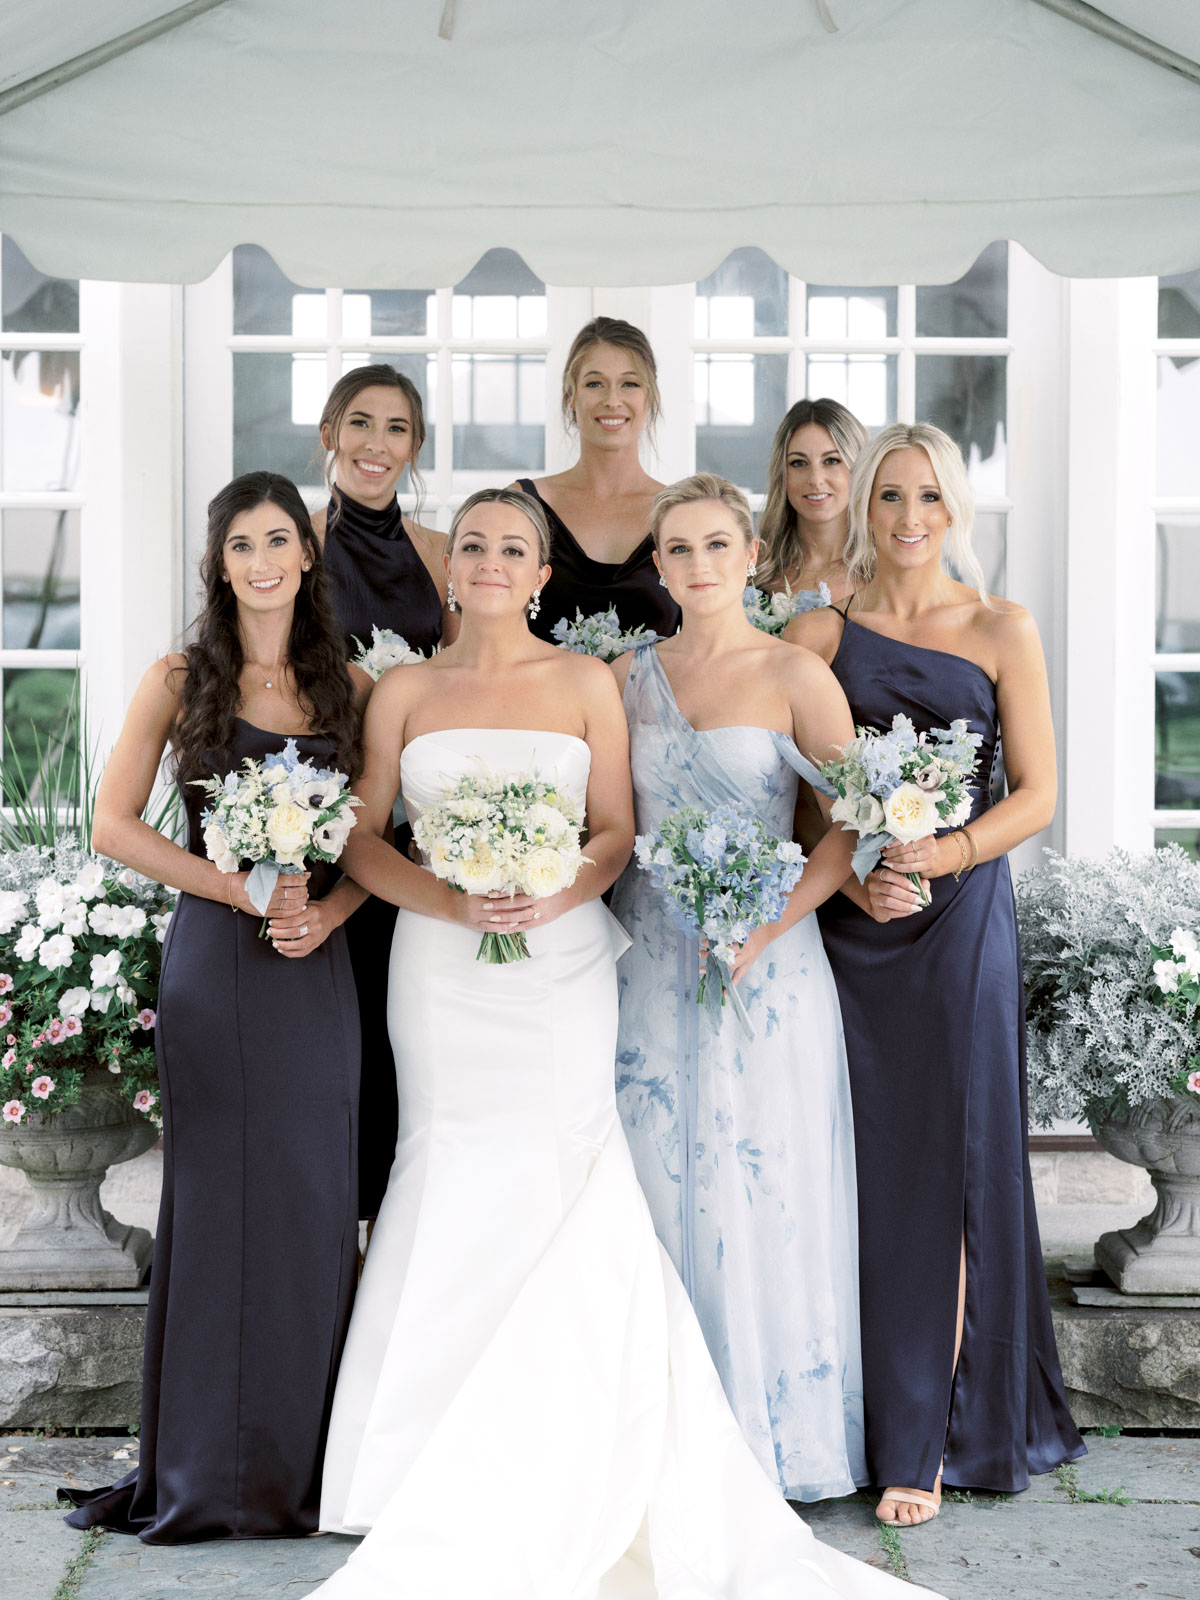 The bride and her bridesmaids are holding their flower bouquets. Editorial wedding image by Jenny Fu Studio